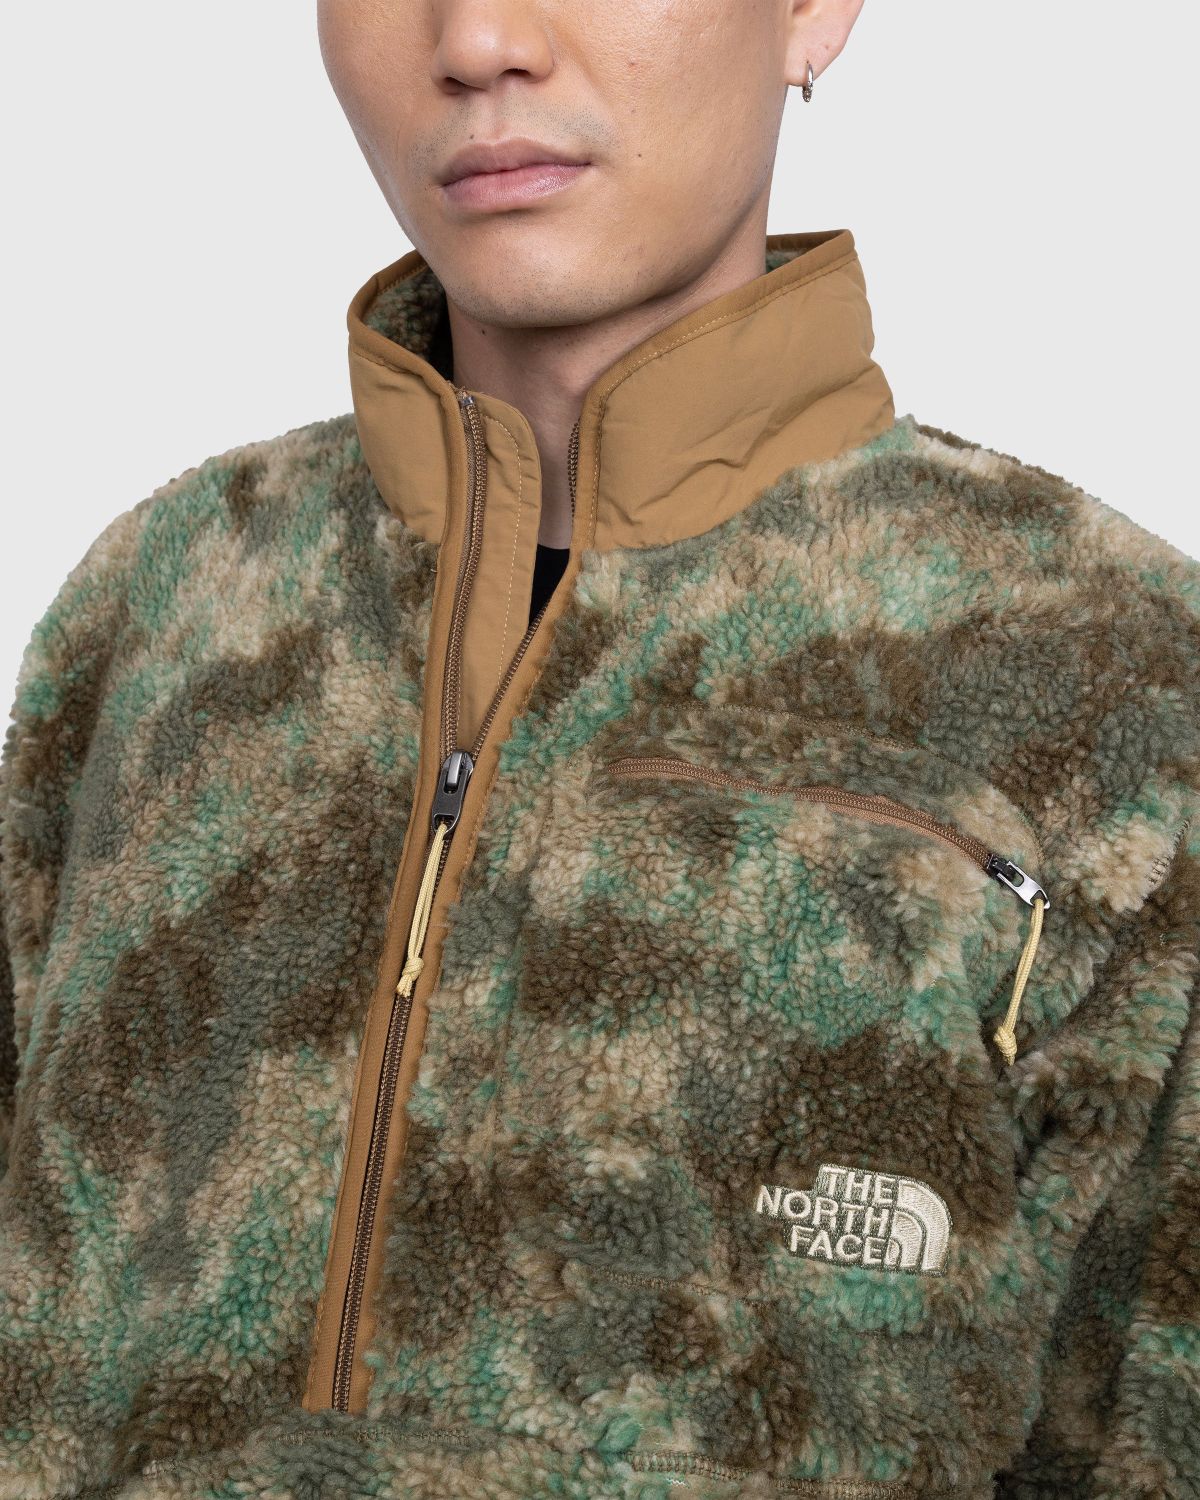 The North Face – Extreme Pile Pullover Military Olive/Stippled Camo Print - Fleece - Green - Image 4